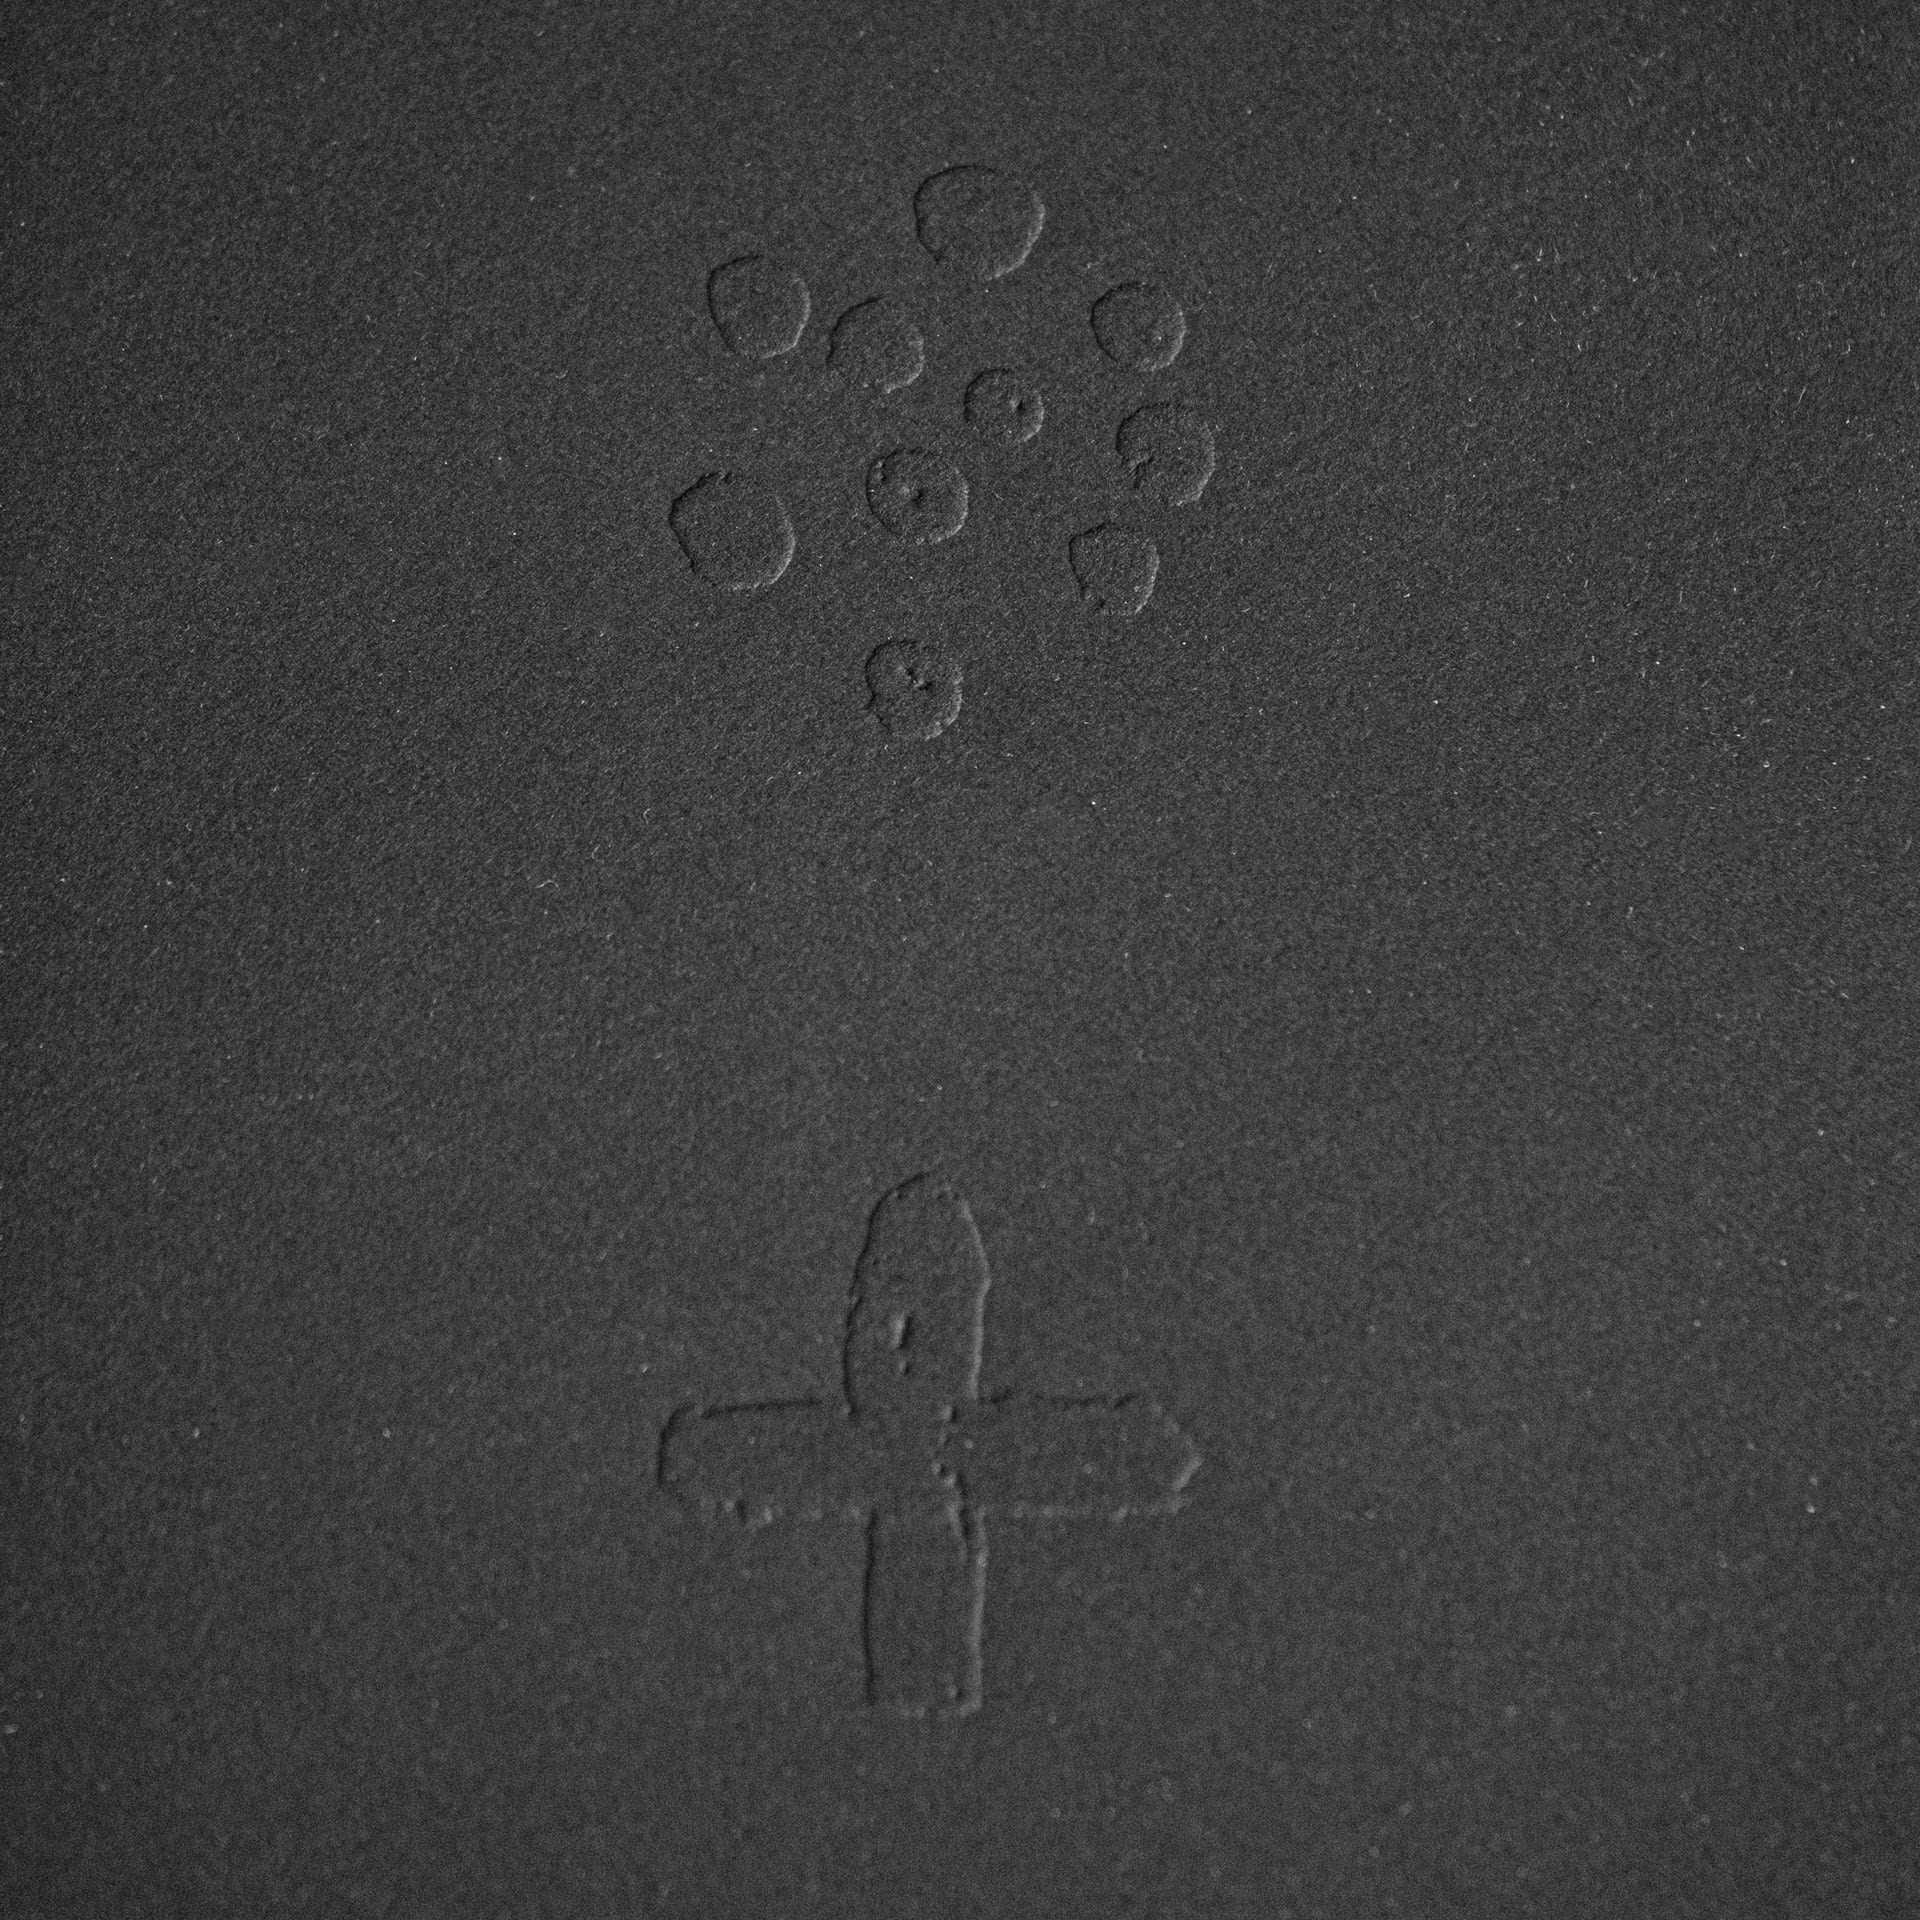 'The Star Of Woman'-image from the series 'Sirius'. Embossed black print of 'The Star Of Woman', constellation of the Dog